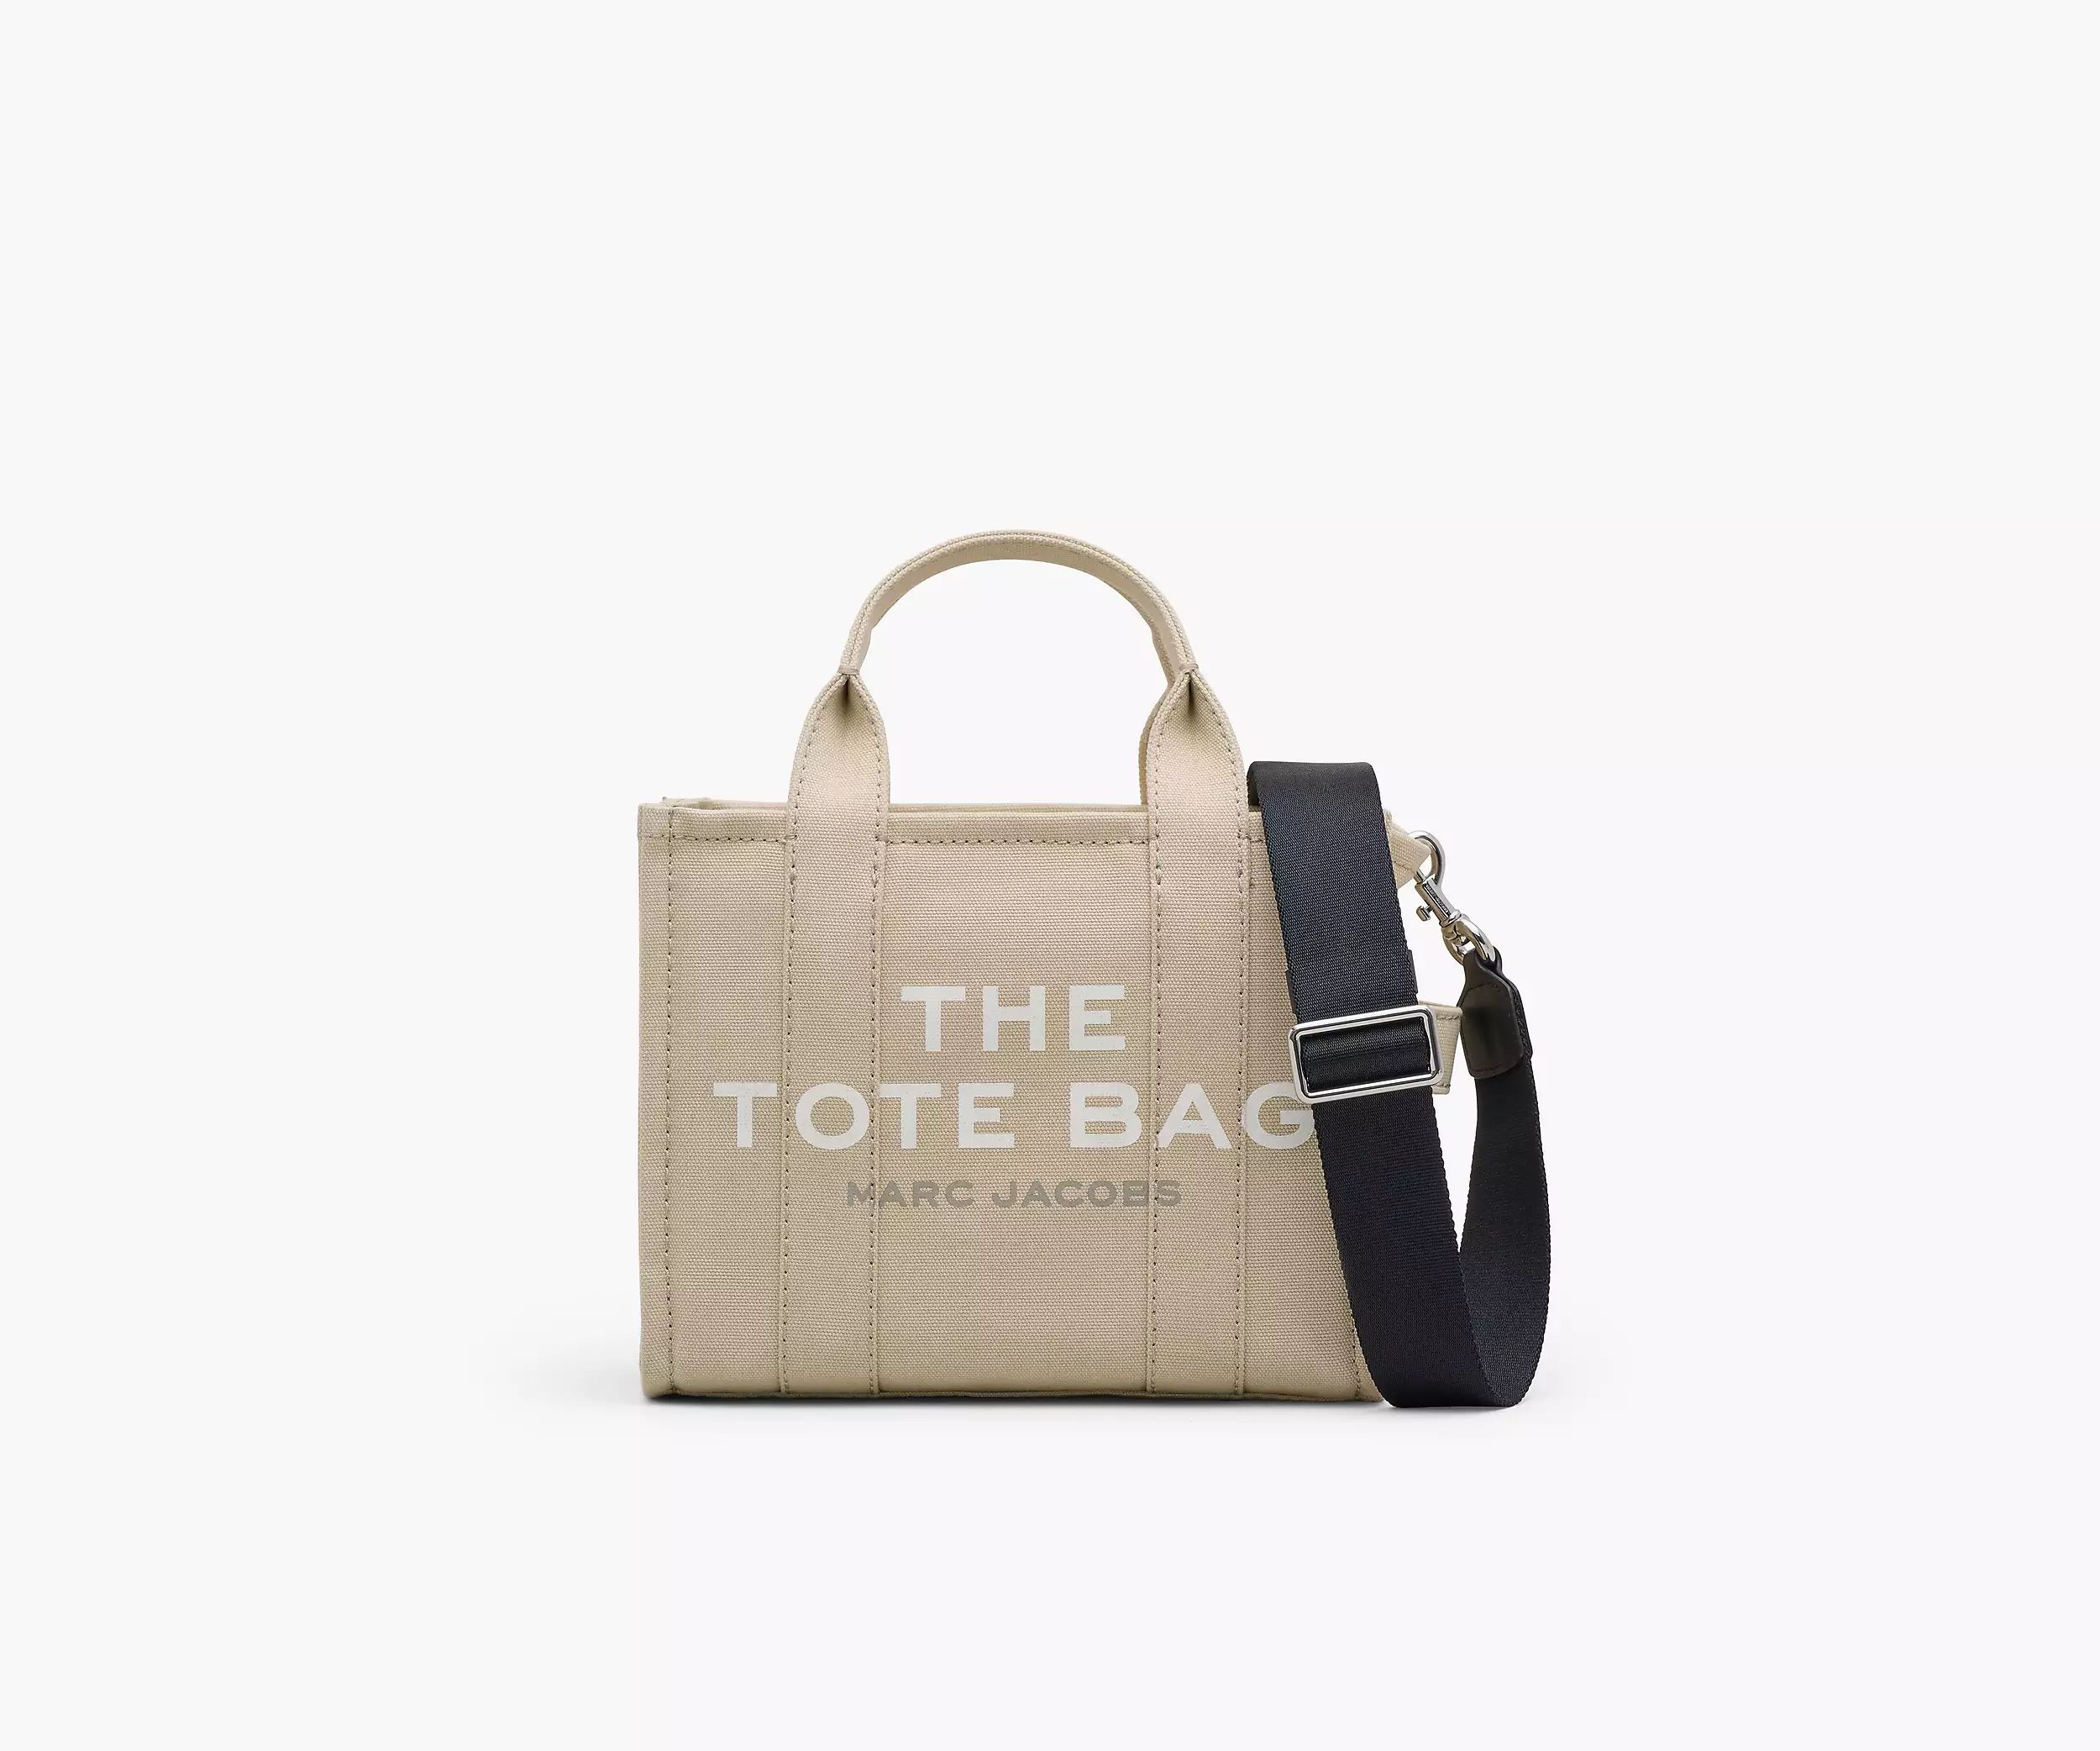 The
Small Tote Bag | Marc Jacobs